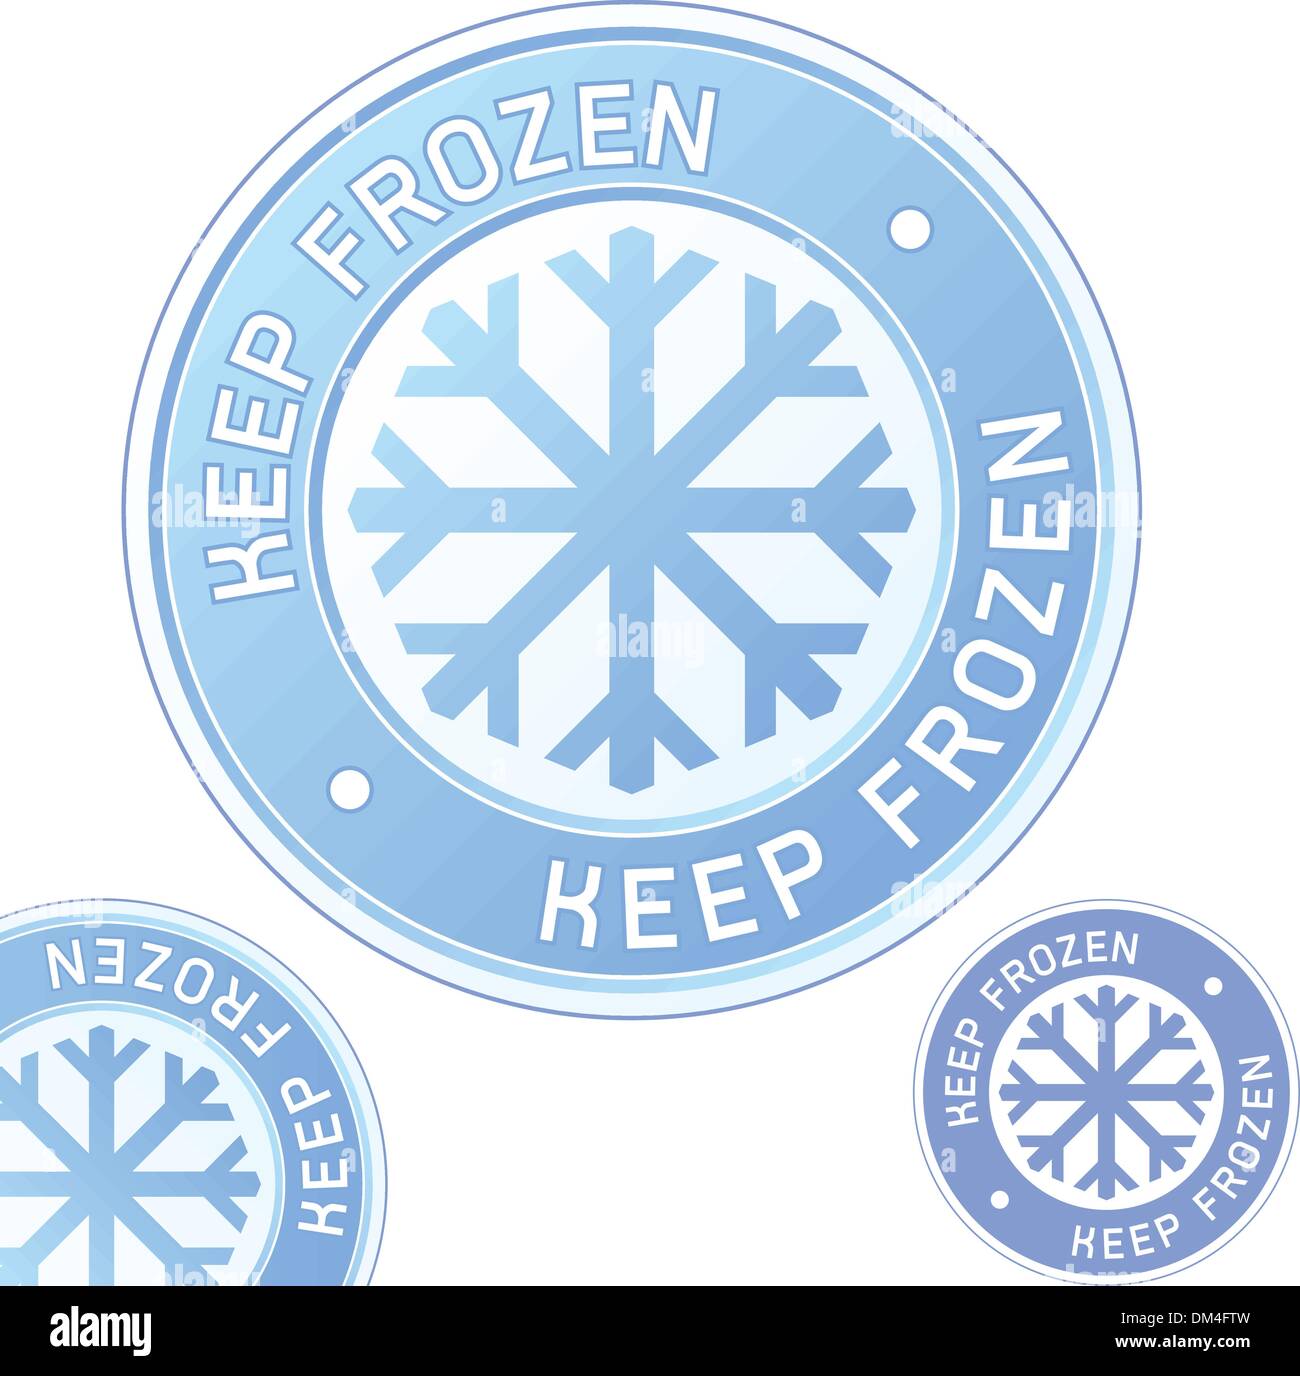 Keep frozen food or product label Stock Vector